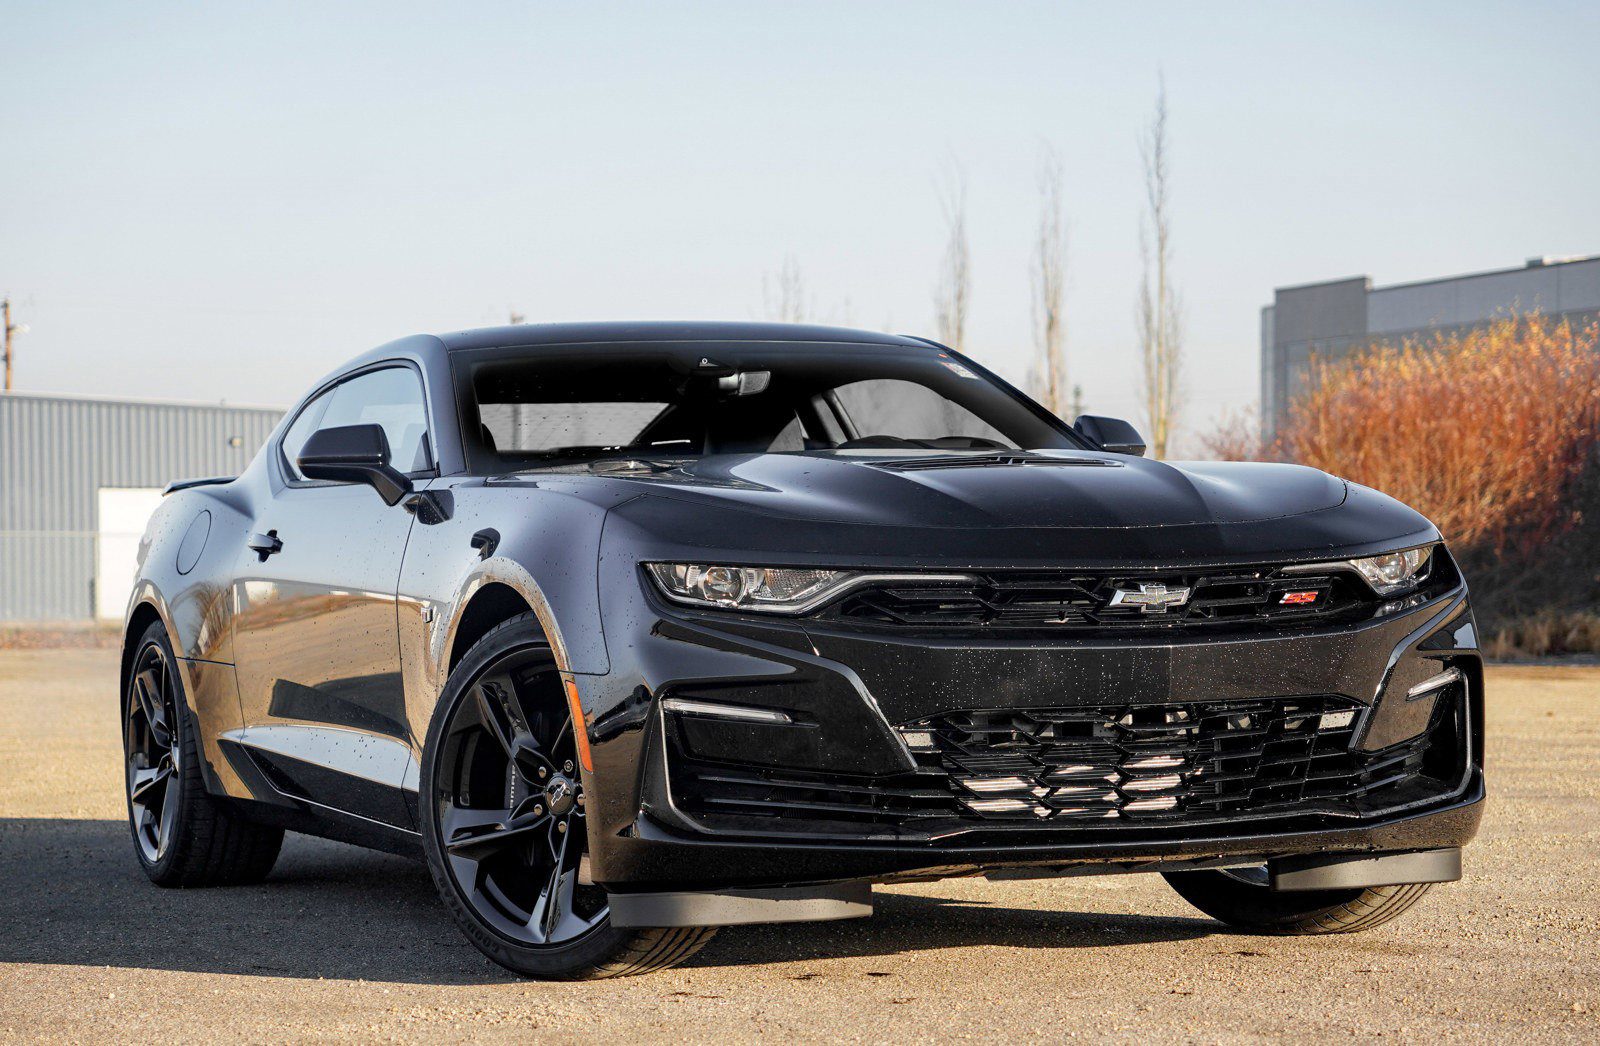 Front-angled view of a black Chevrolet Camaro SS